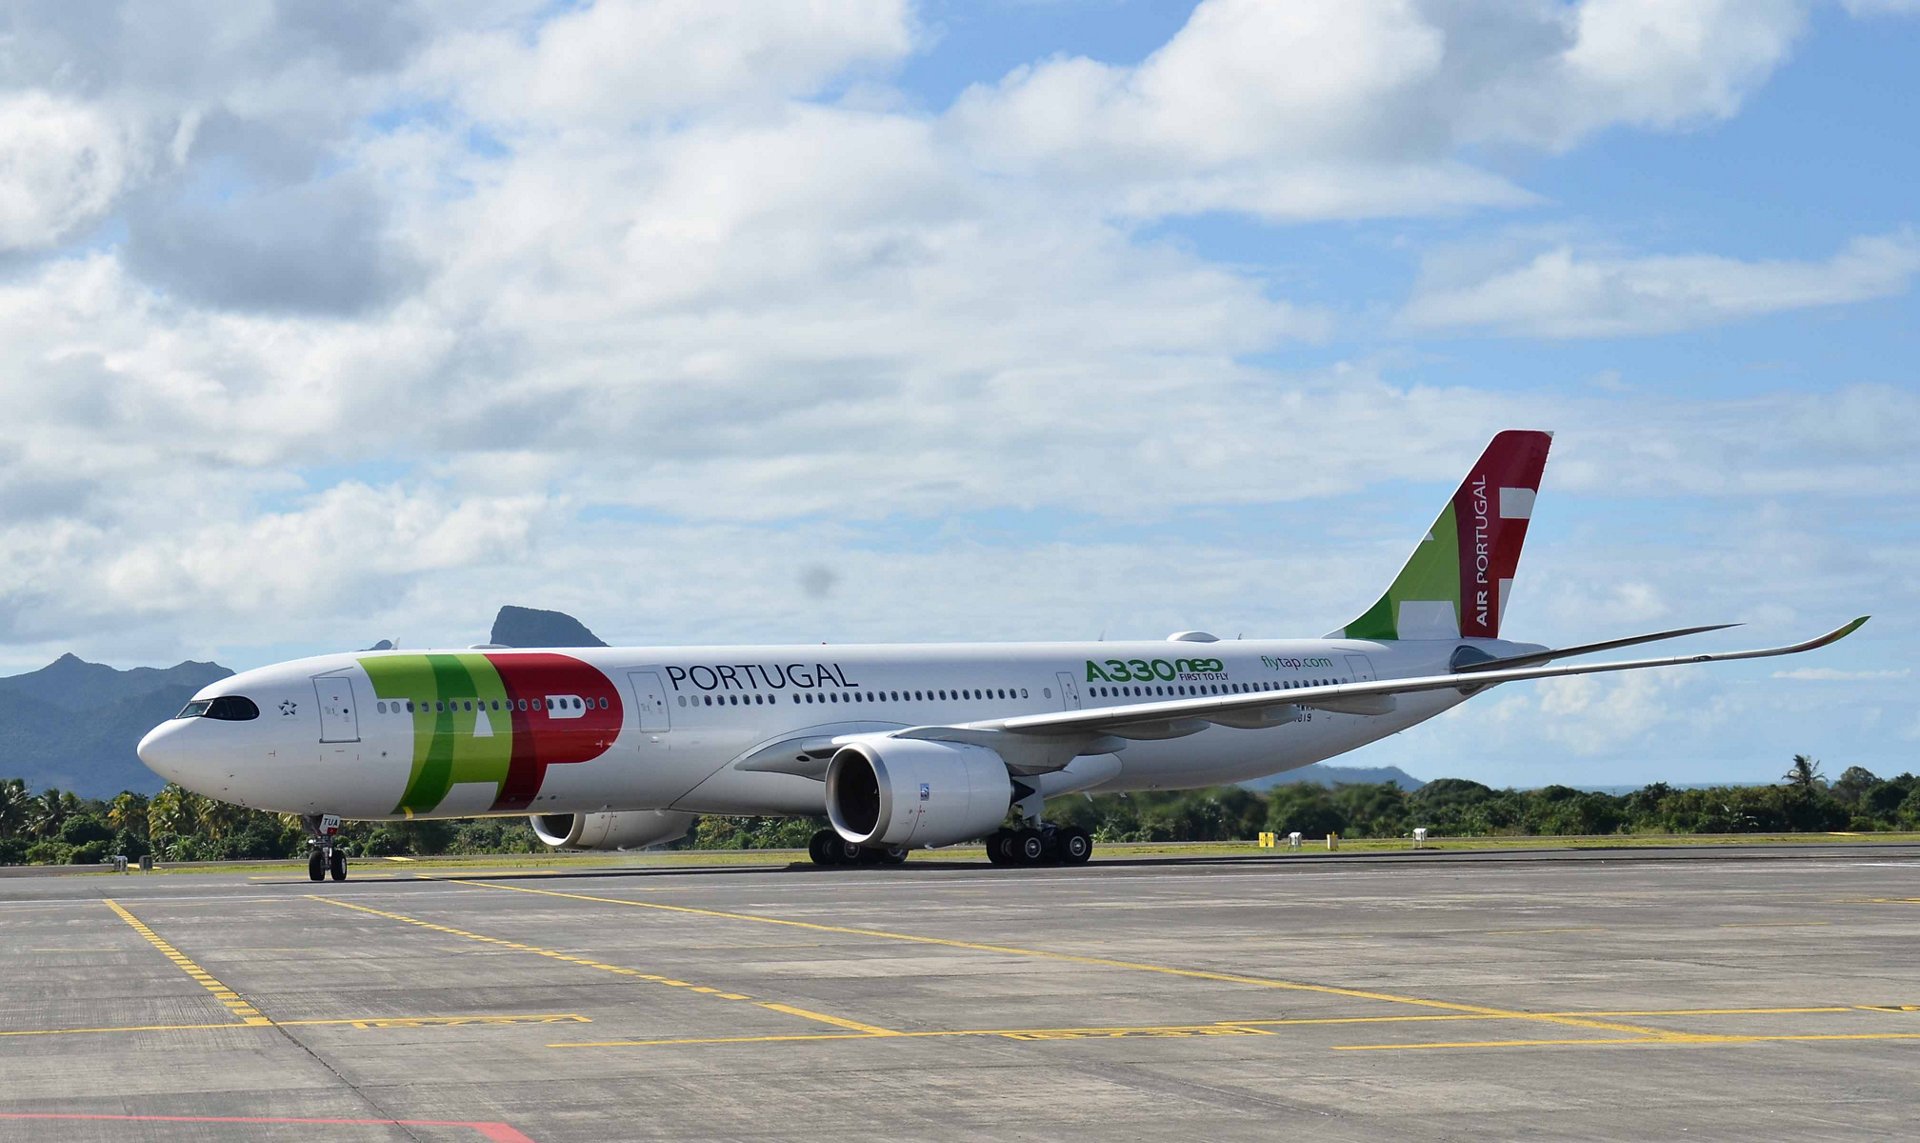 Airbus Newest Widebody A330neo In Mauritius For The First